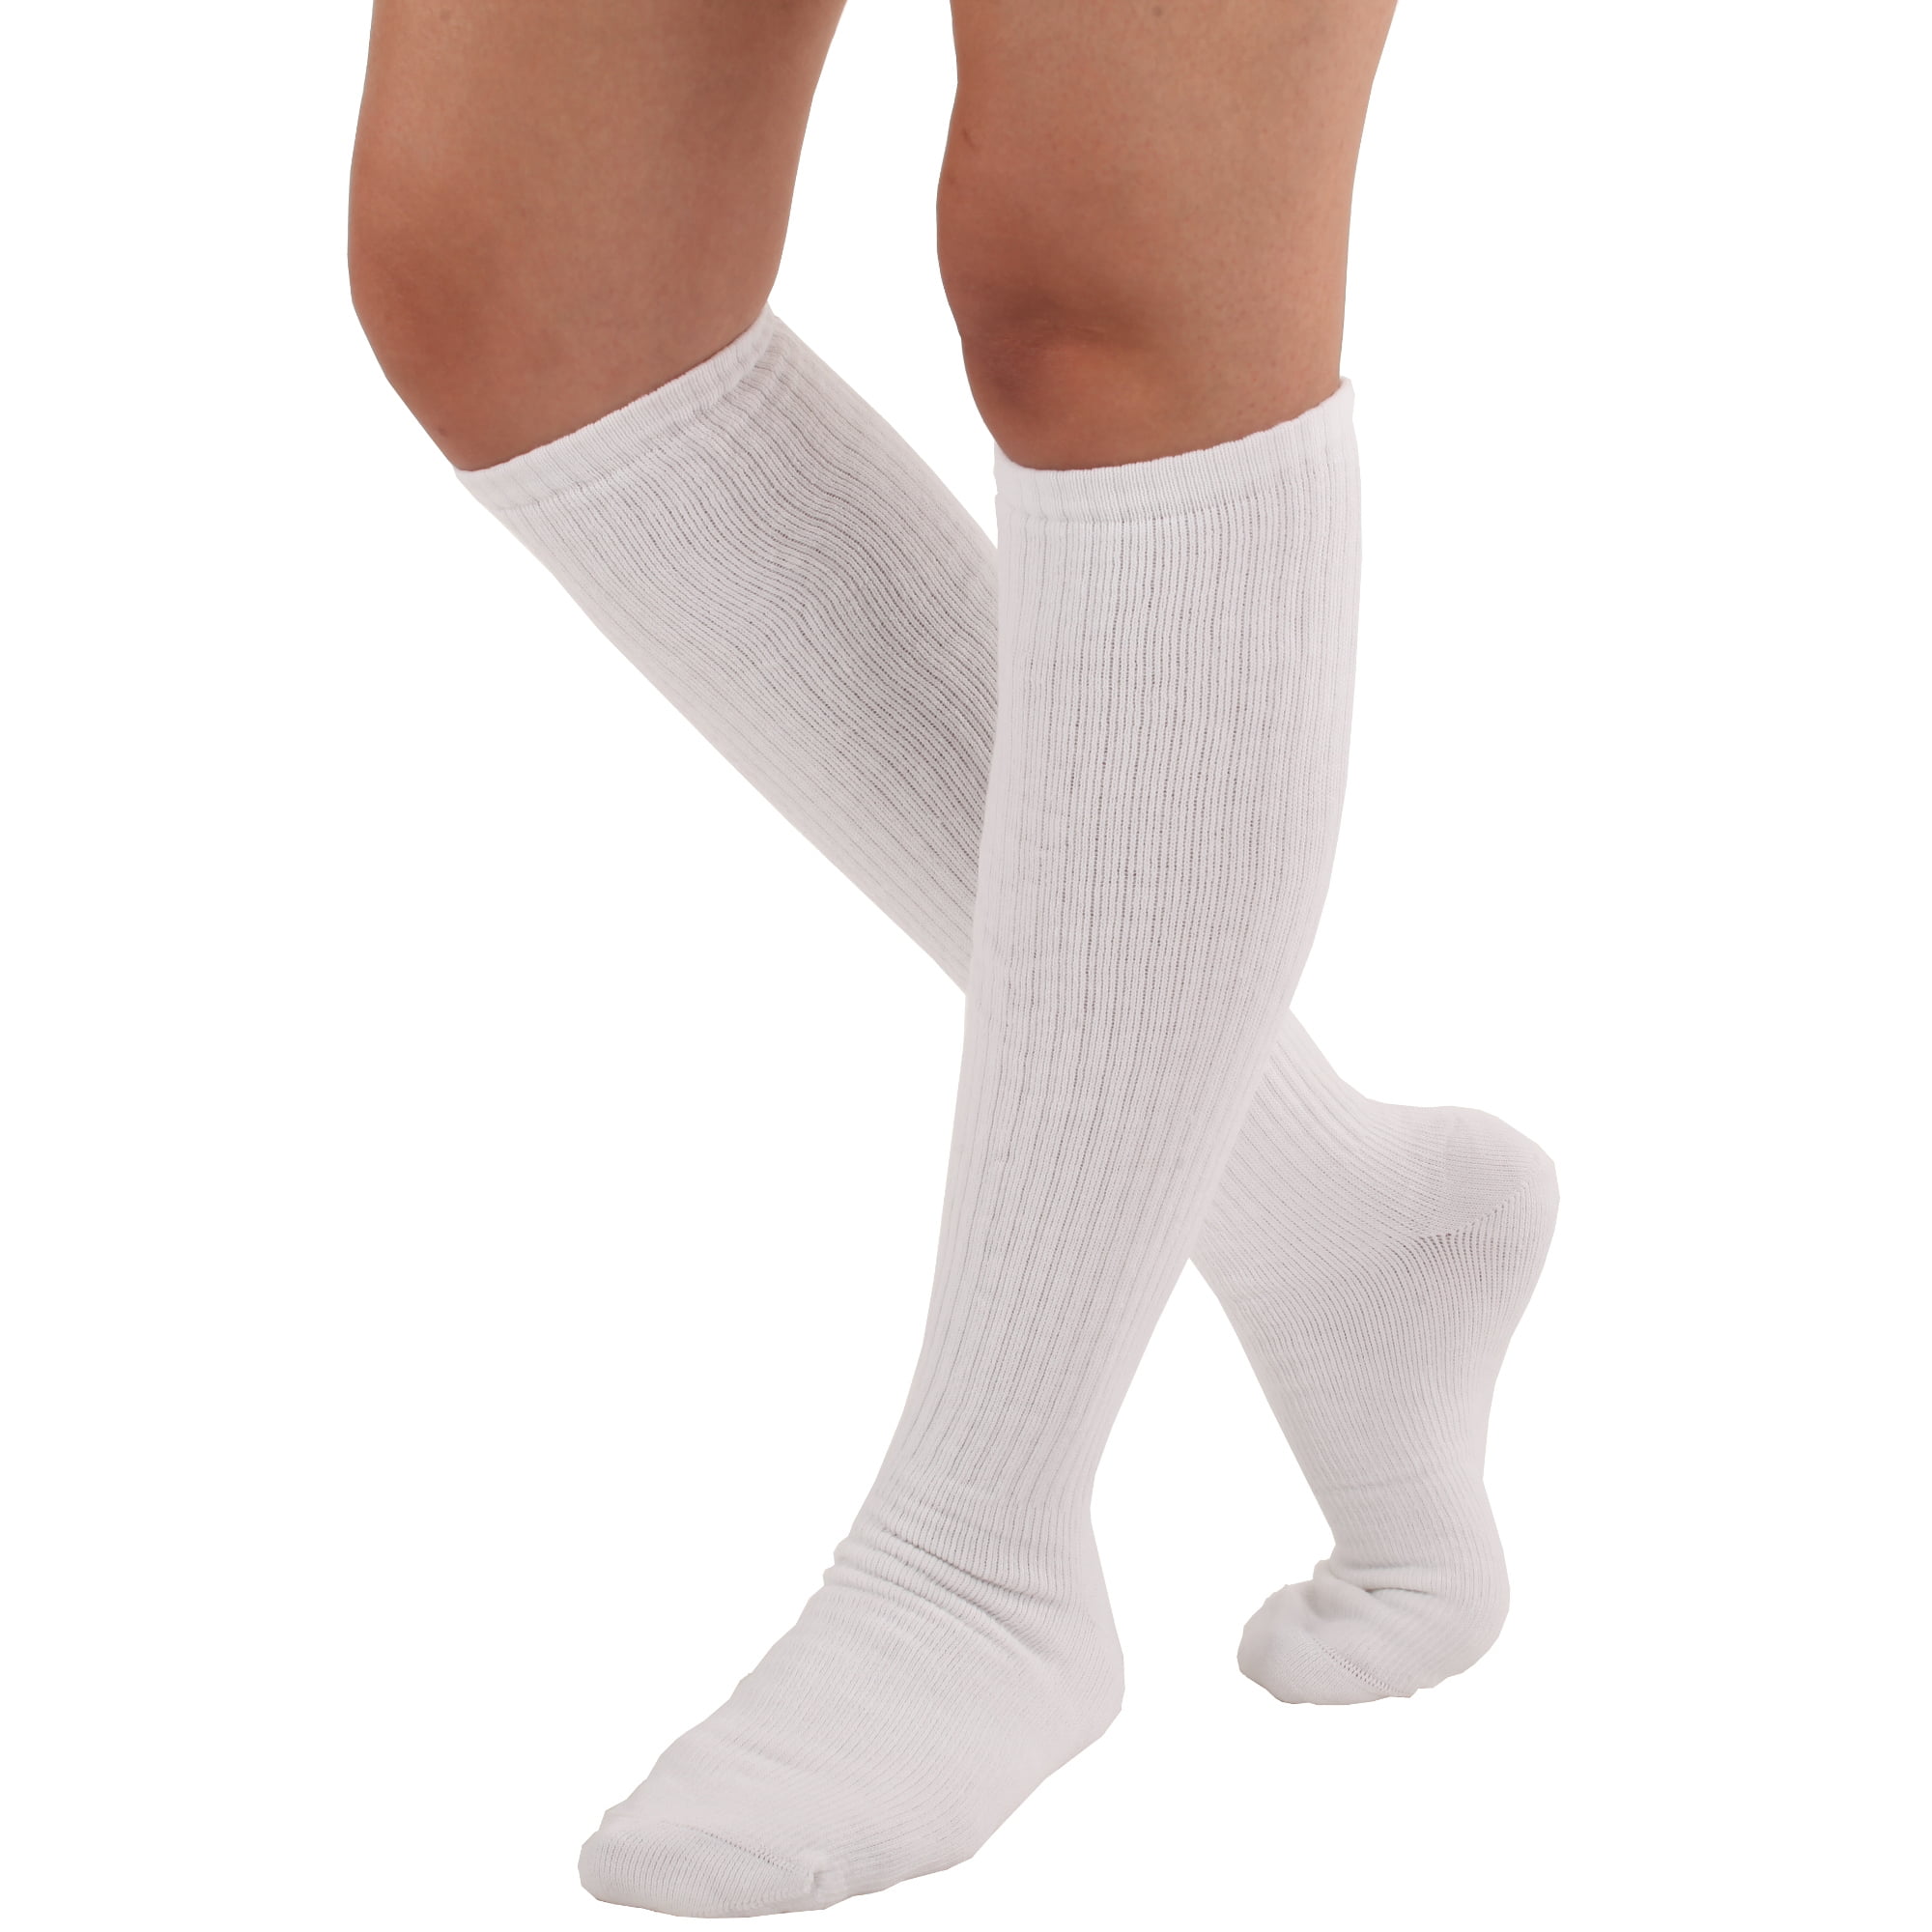 Absolute Support Unisex Over the Calf 8-15mmHg Light Support ...